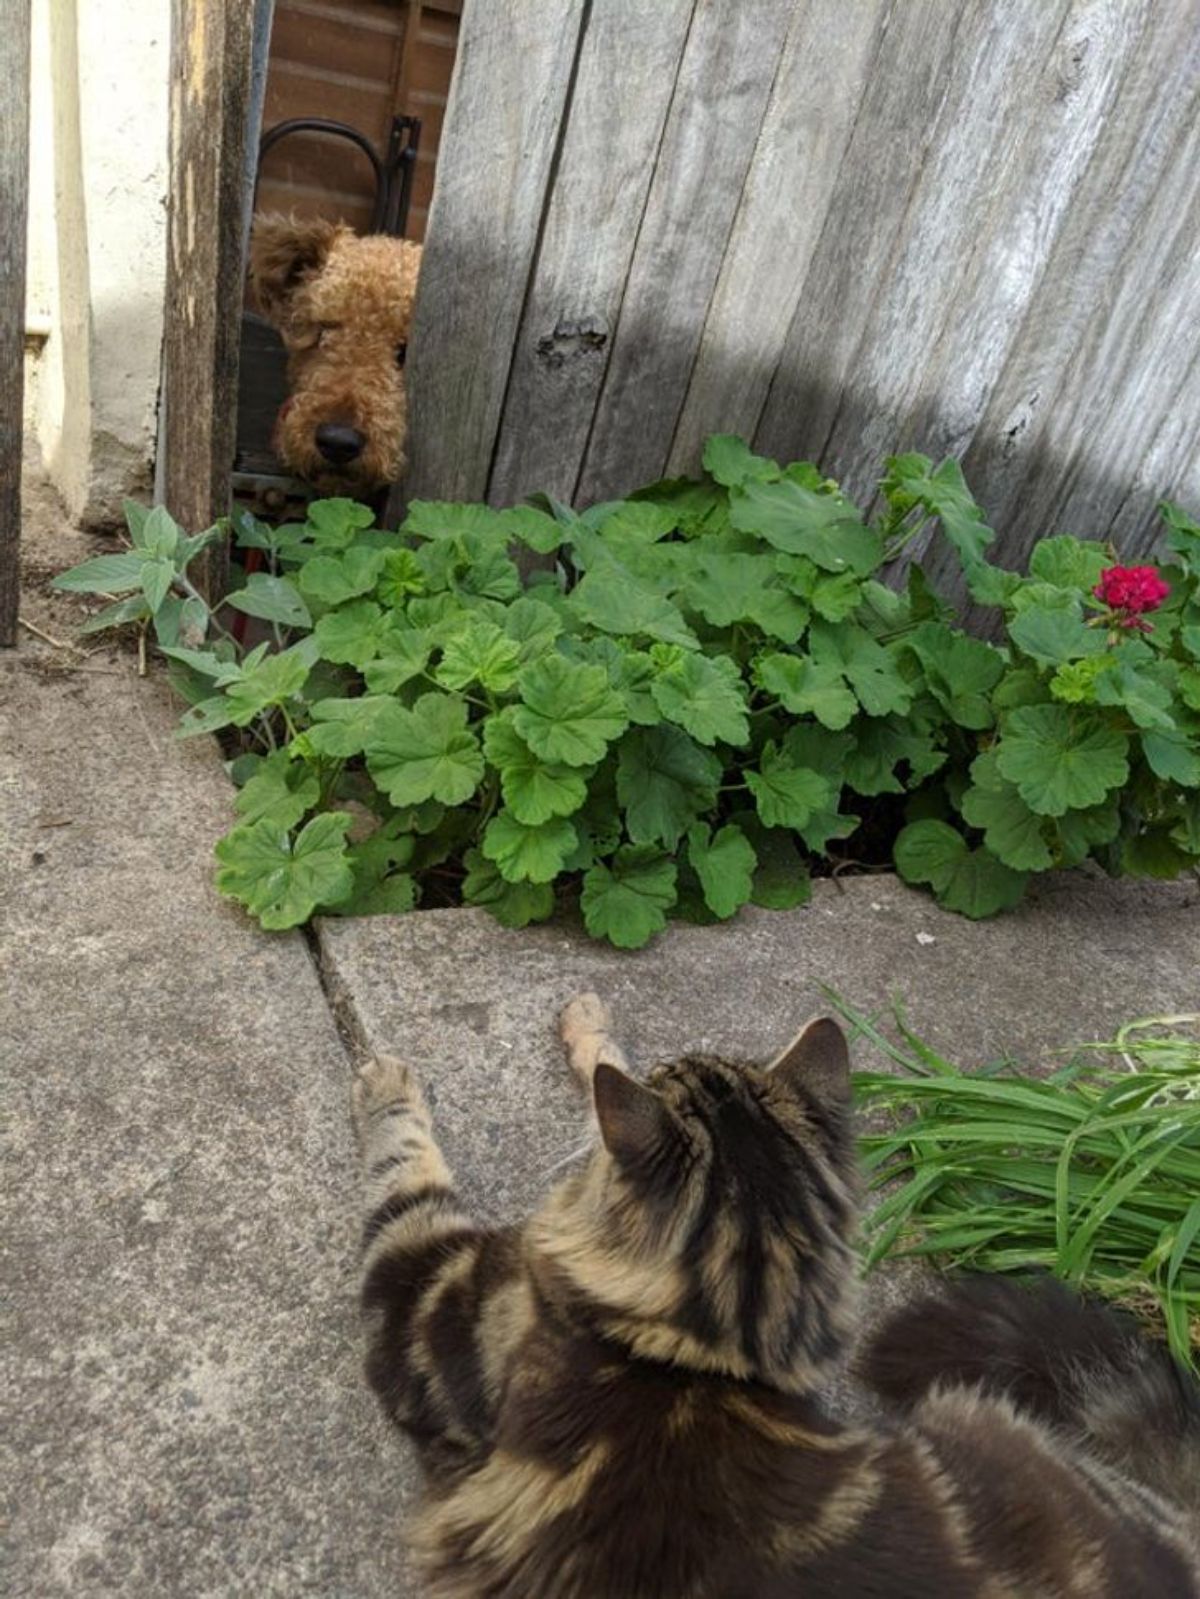 brown dog's face peeking from the side of a wooden fence opposite a fluffy brown tabby cat